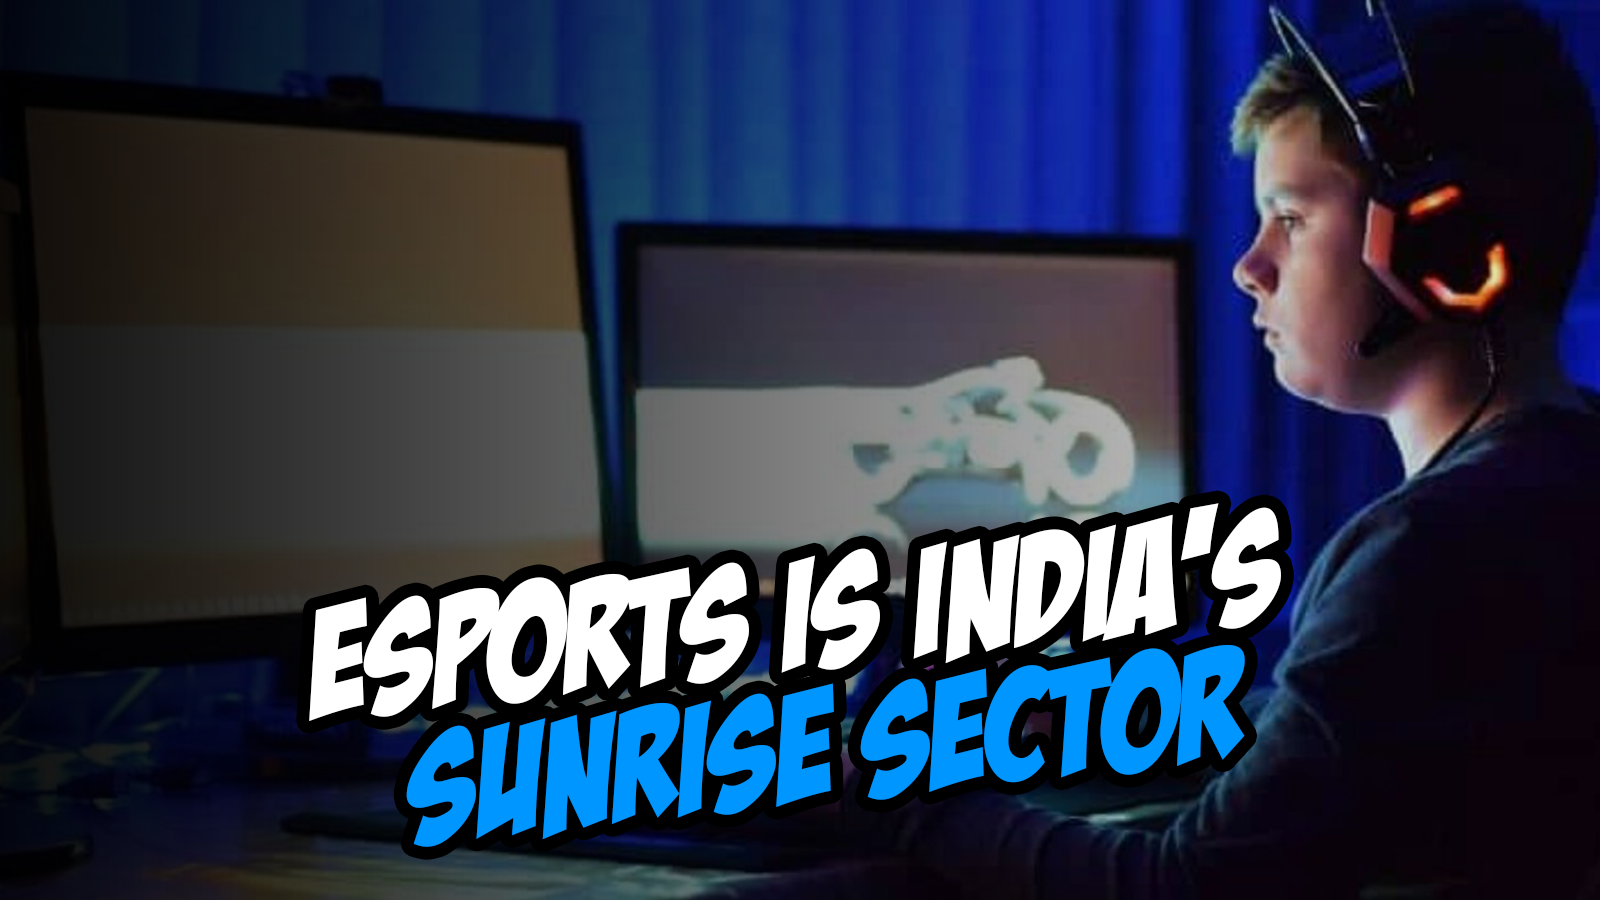 Ready Player One: Esports is India Sunrise Sector, Set to Become a Rs 1,100 Crore Industry by 2025